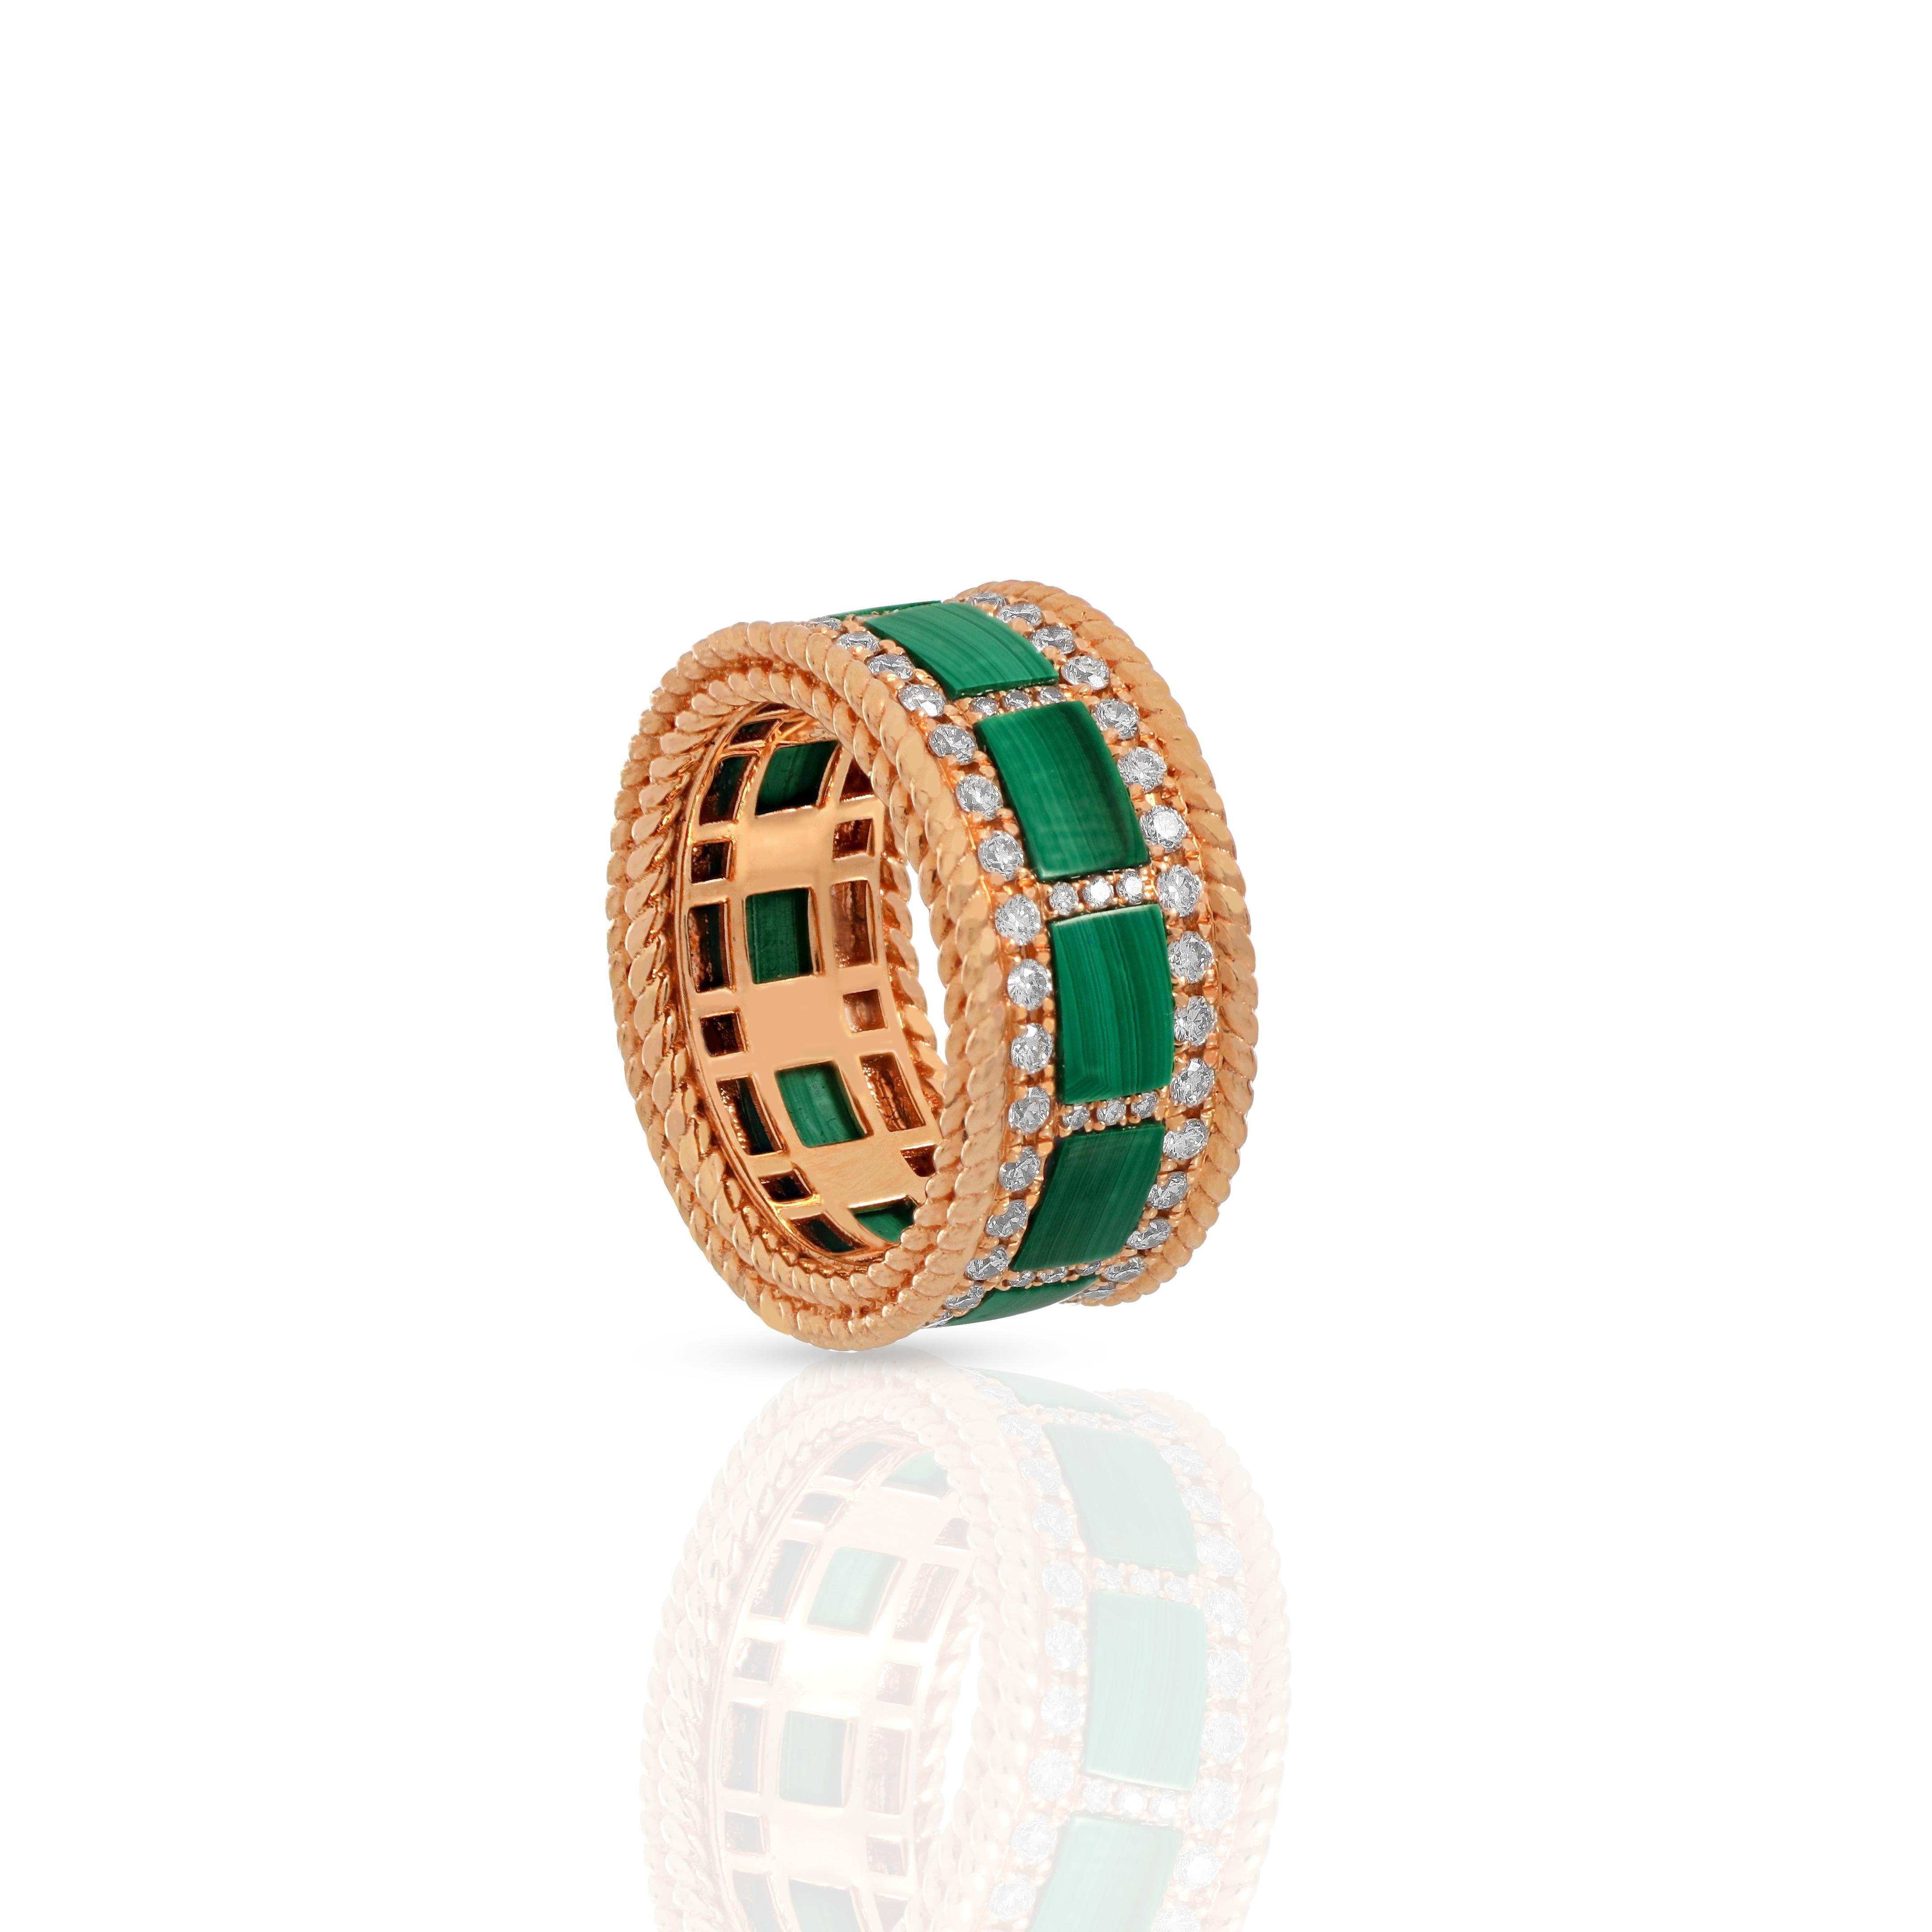 A tribute to refined elegance, the classic design of this 18k rose gold ring featuring malachite surrounded by brilliant cut diamond.

Weight: 9.61 g
Diamond: 1.14 cts 
Color & clarity: H, SI 
